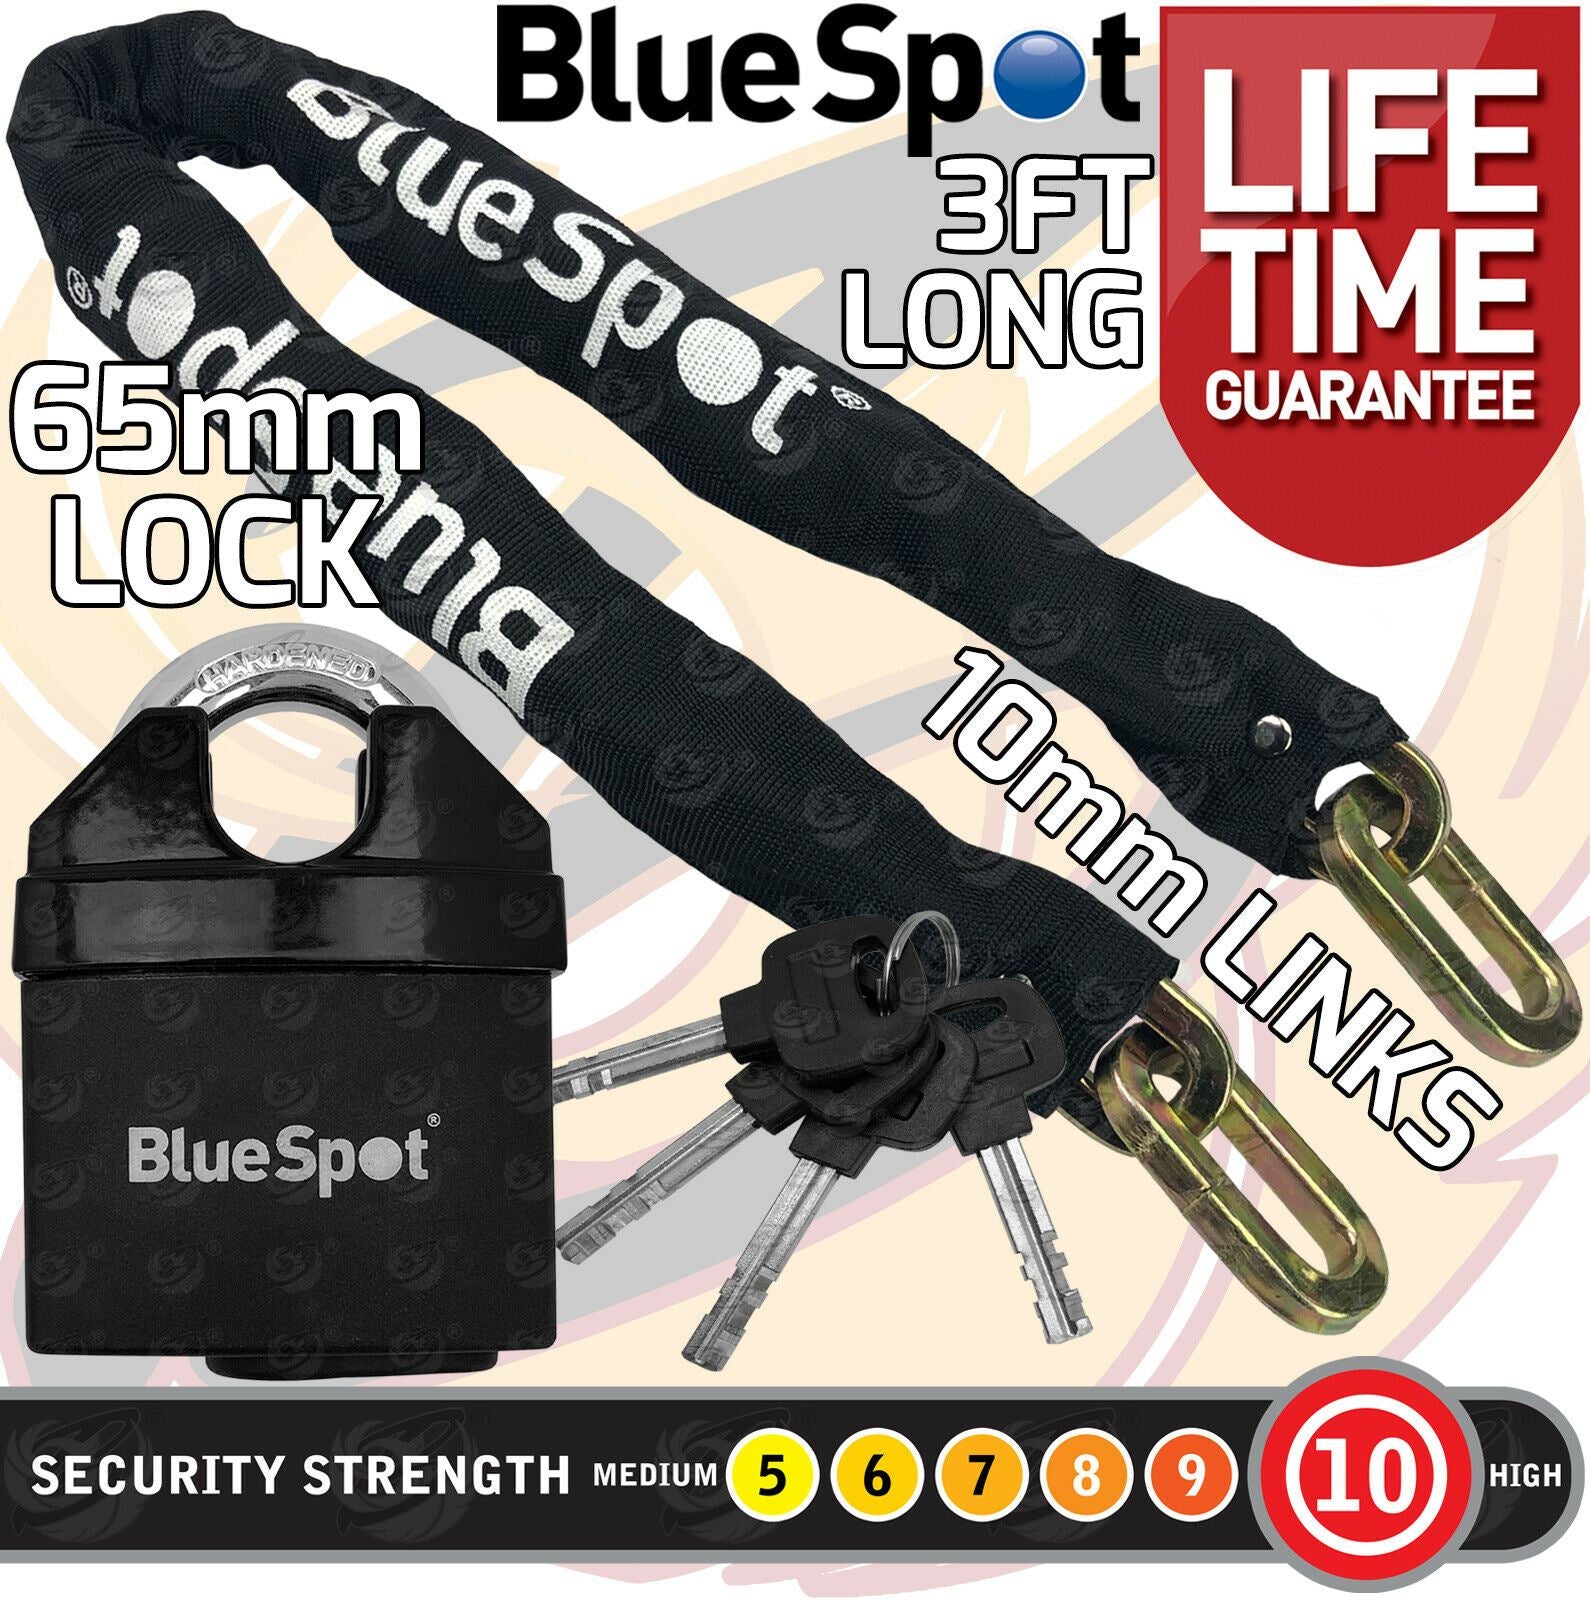 BLUESPOT 3FT LONG 10MM LINKS SECURITY CHAIN WITH 65MM HIGH SECURITY PADLOCK